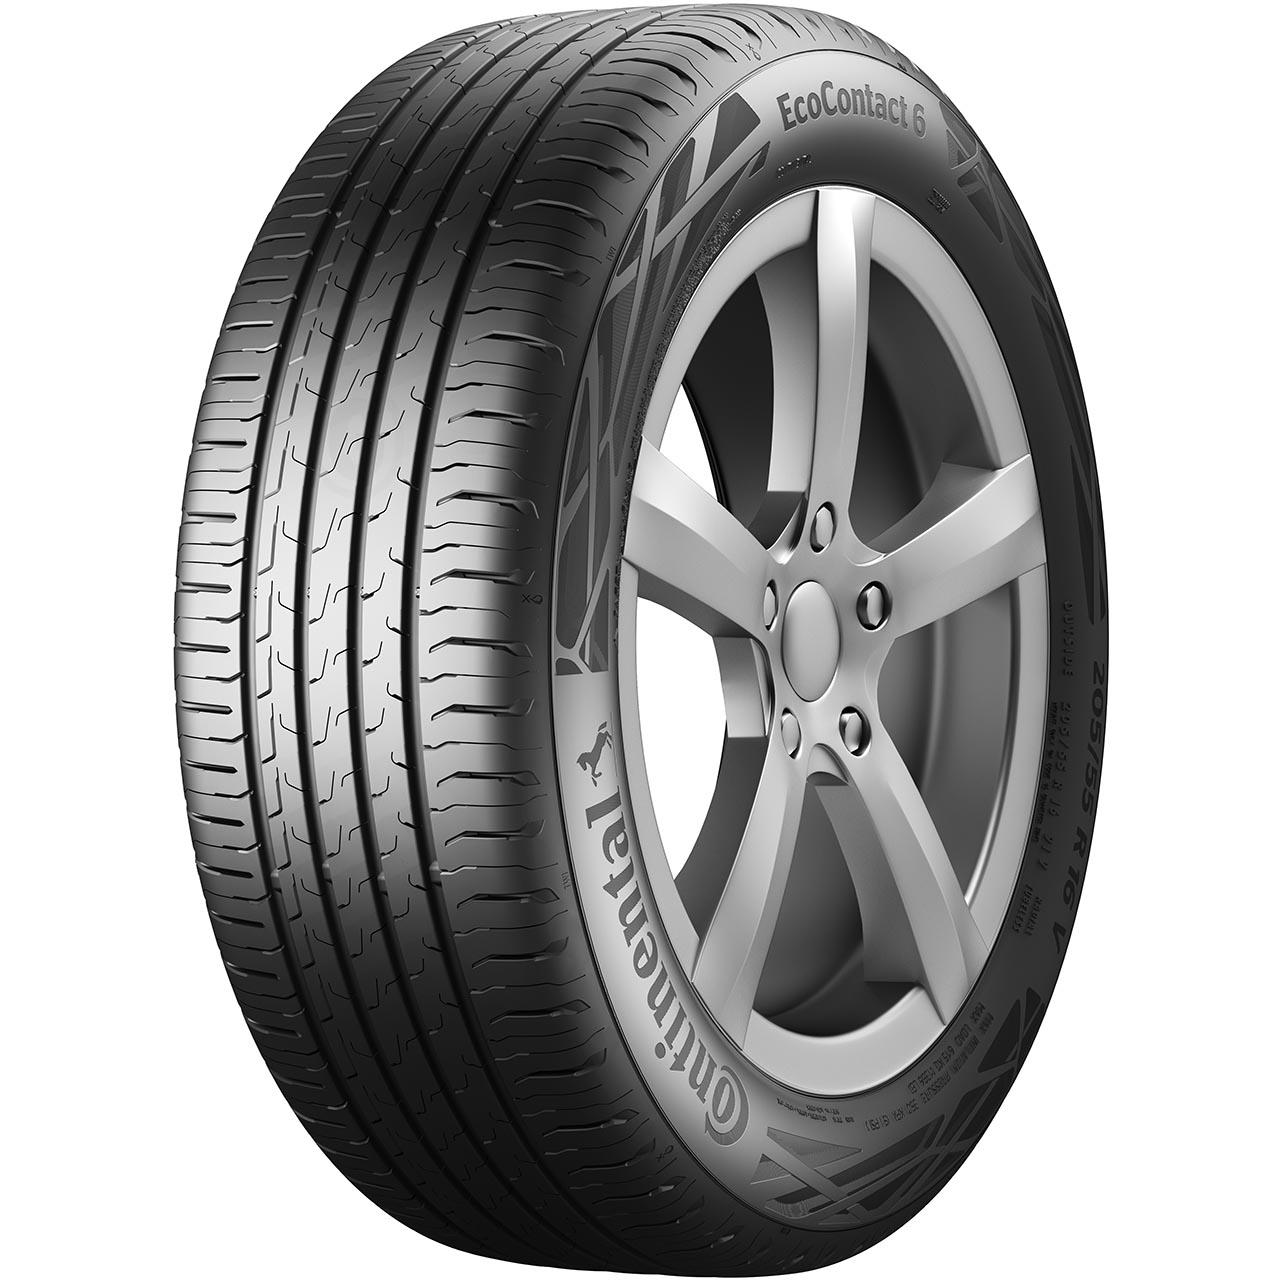 CONTINENTAL ECOCONTACT 6 (VW) 205/55R16 94H